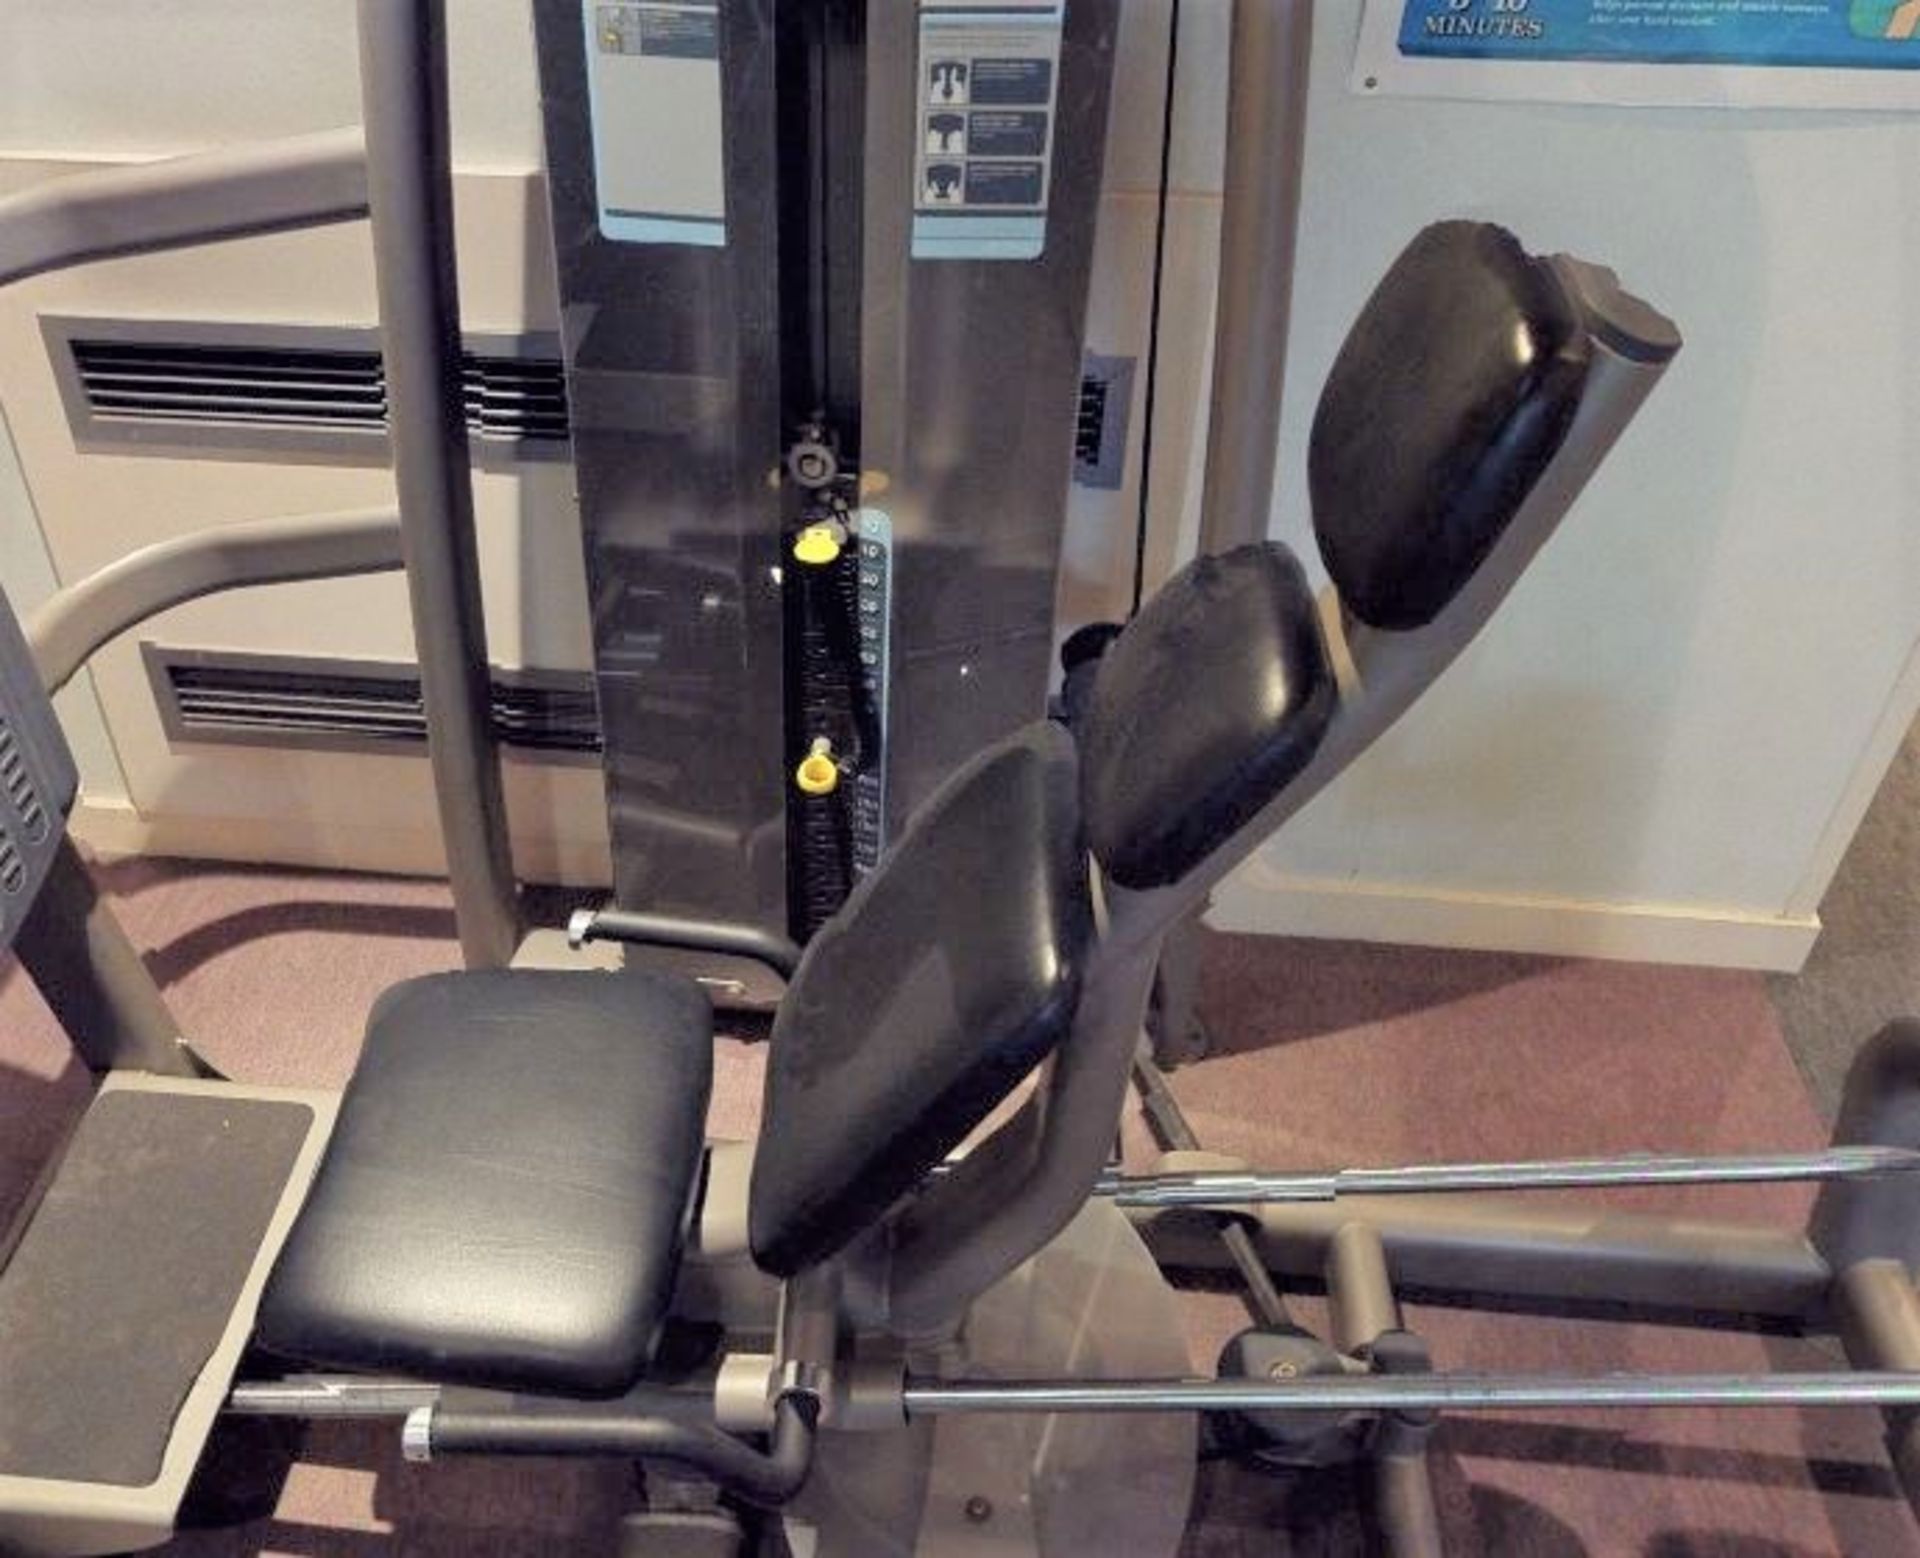 1 x Pulse Fitness Seated Leg Press - Image 4 of 7